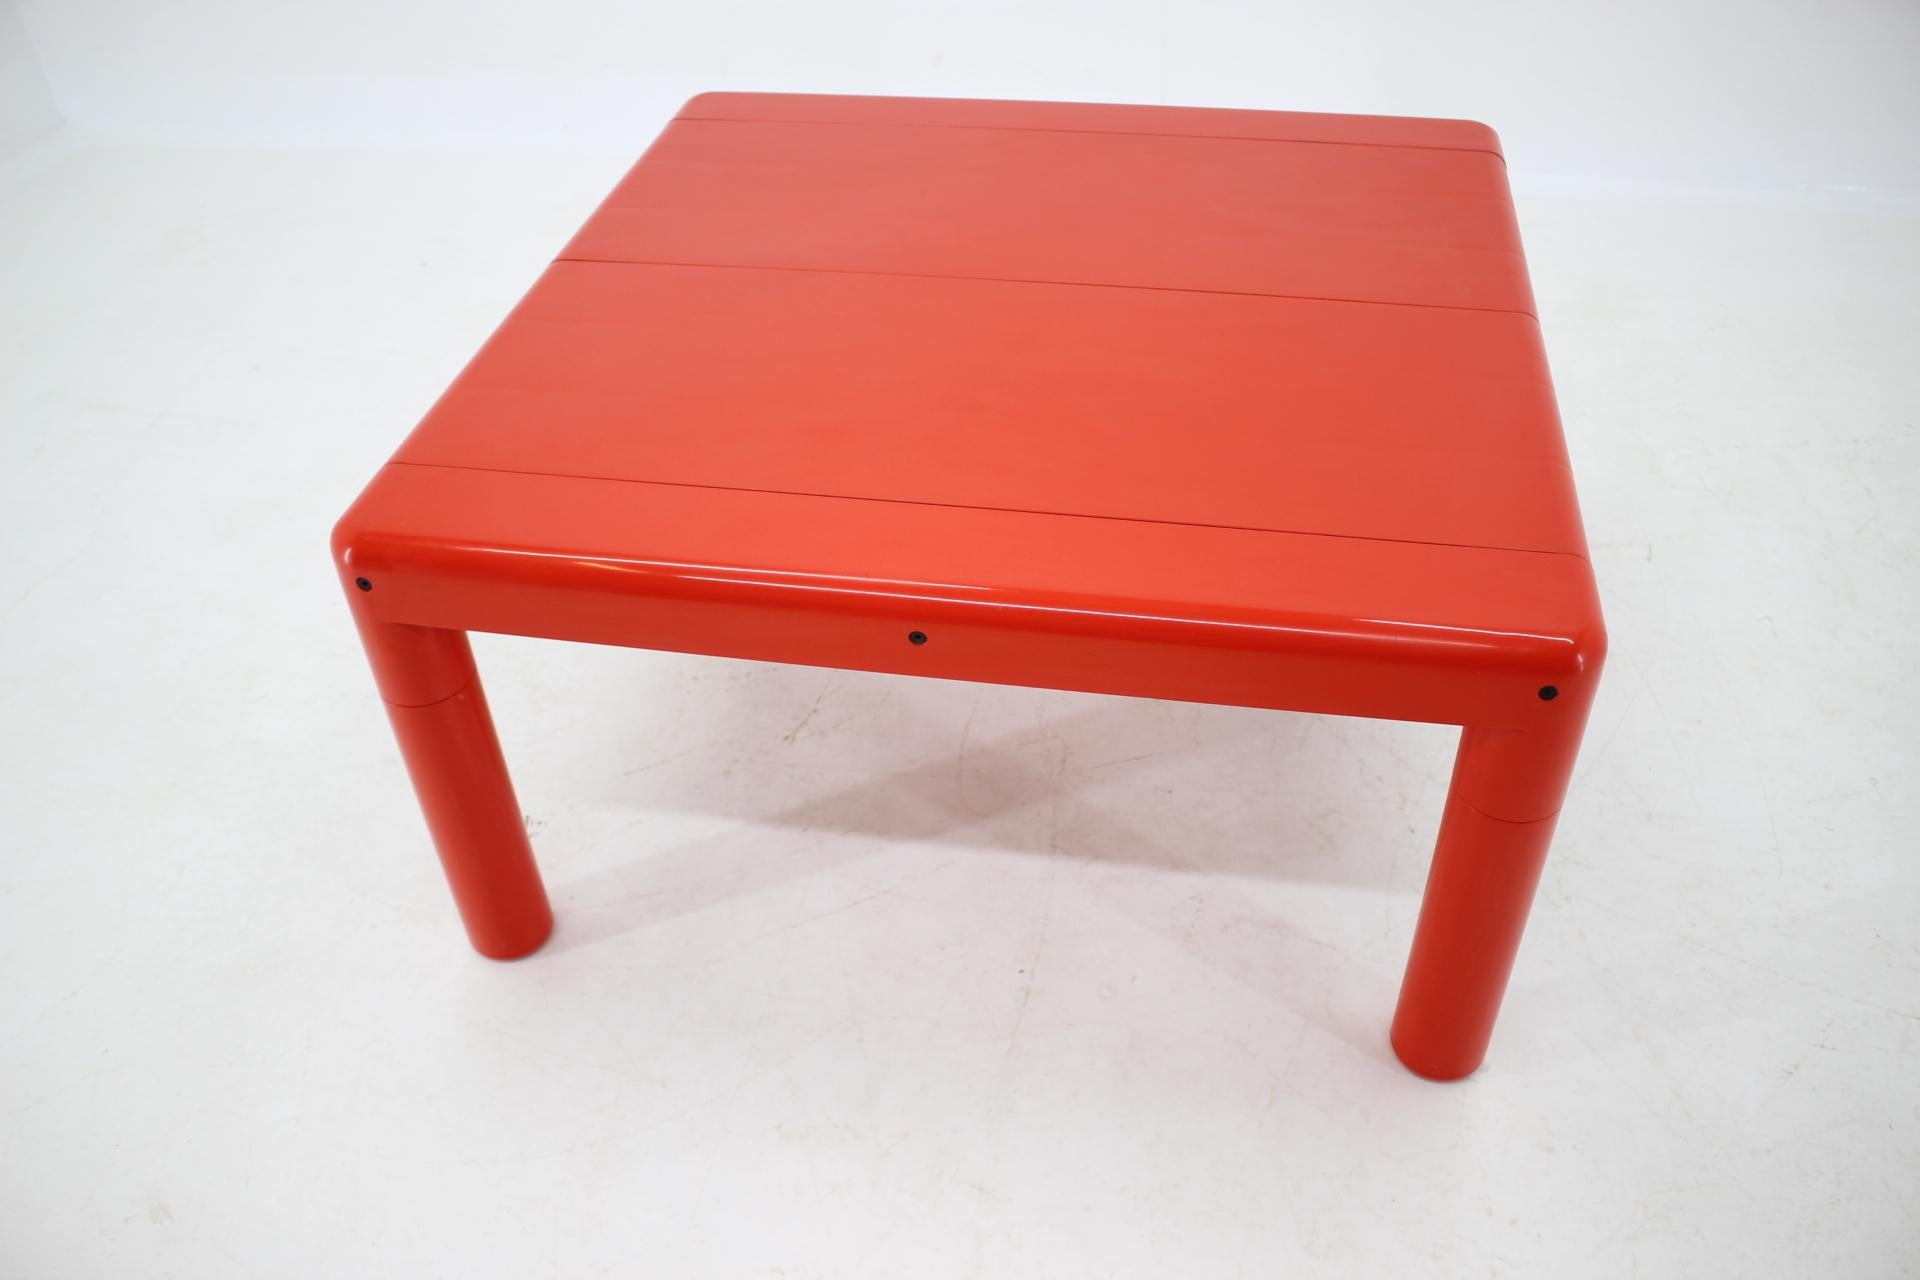 Mid-Century Modern Midcentury Space Age Coffee Table UPO, Eero Aarnio, Finland, 1970s For Sale